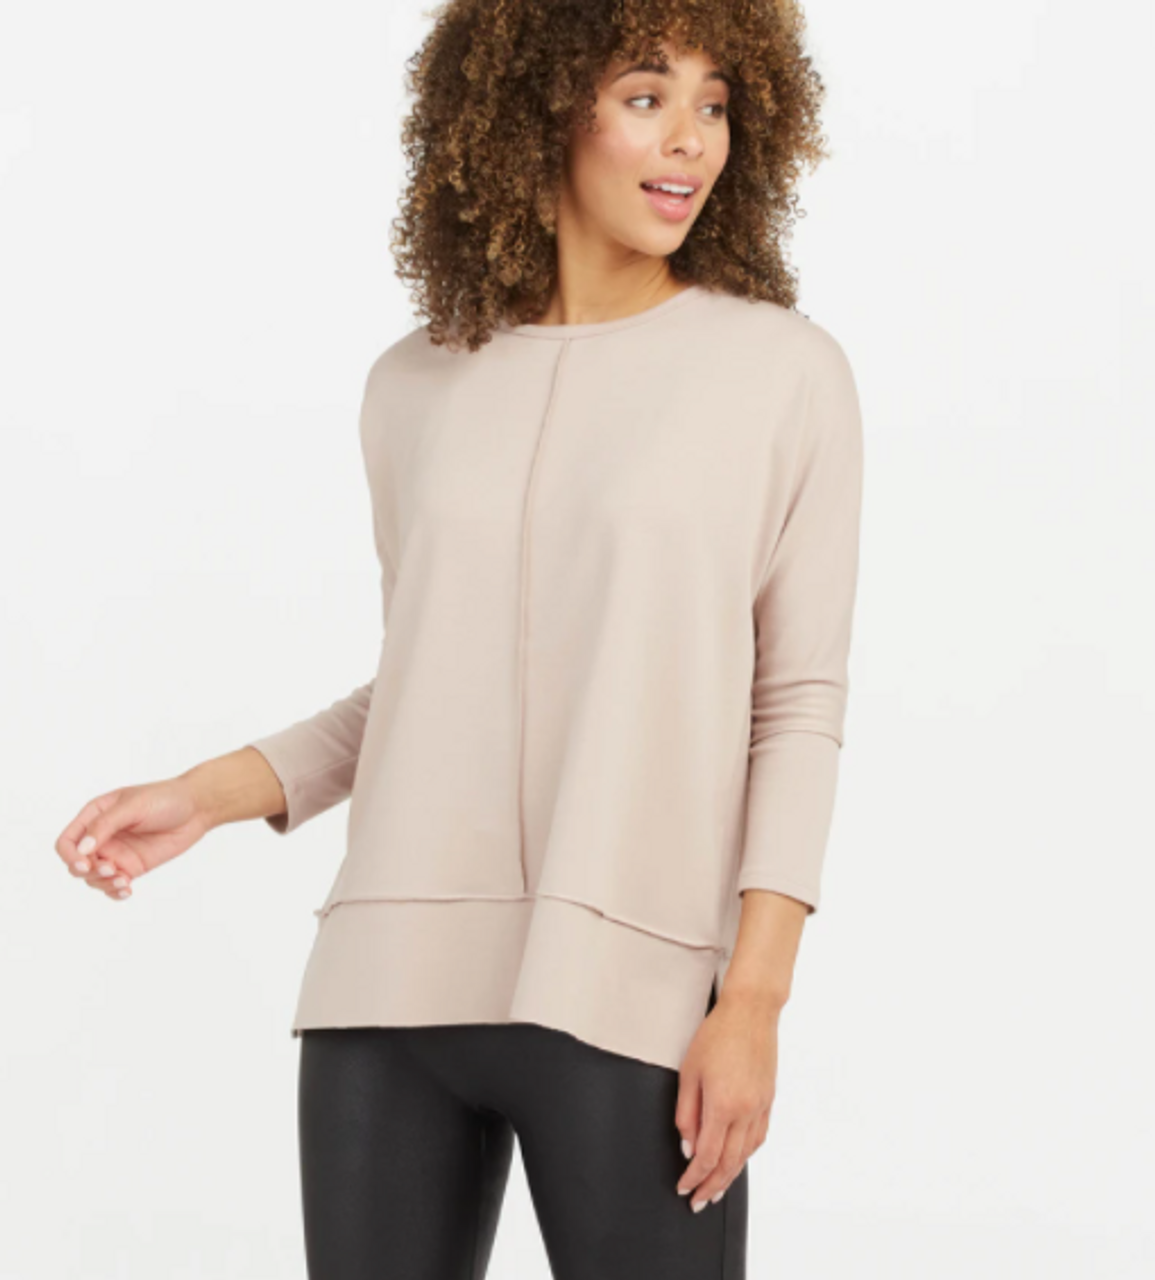 SPANX AIRESSENTIALS CAP SLEEVE TOP - Steve's on the Square